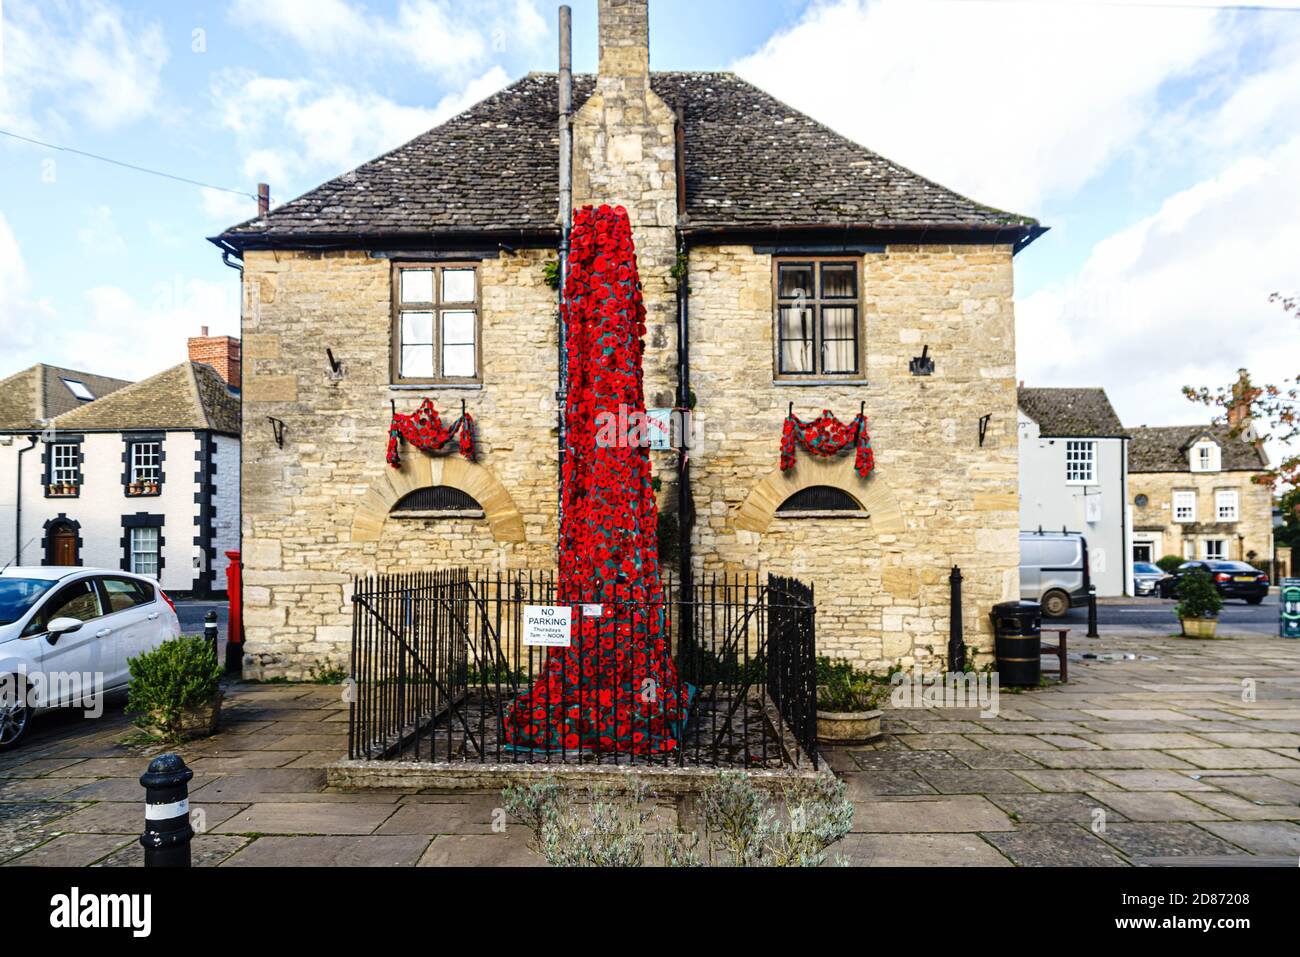 Members of the Eynsham branch of the West Oxfordshire Women’s Institute have crafted a poppy quilt, displayed in the village square. Remembrance Stock Photo